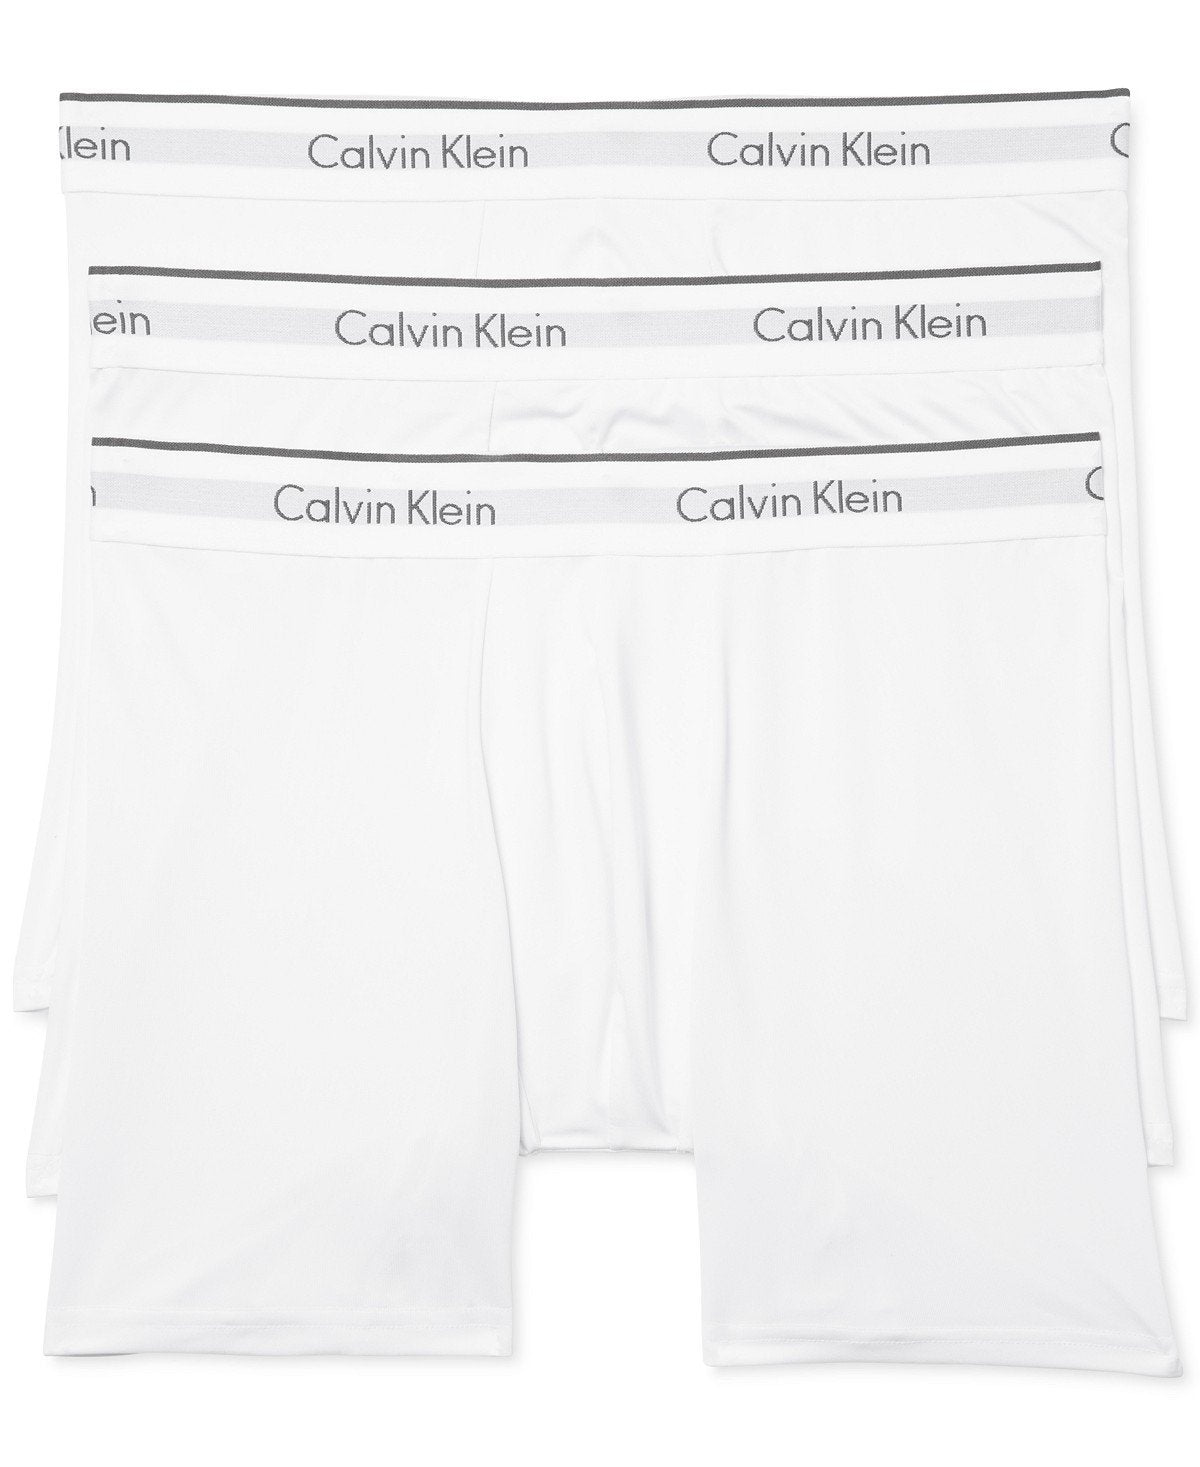 Calvin Klein Micro Stretch Wicking Thong 3-Pack Black/Convoy/Red